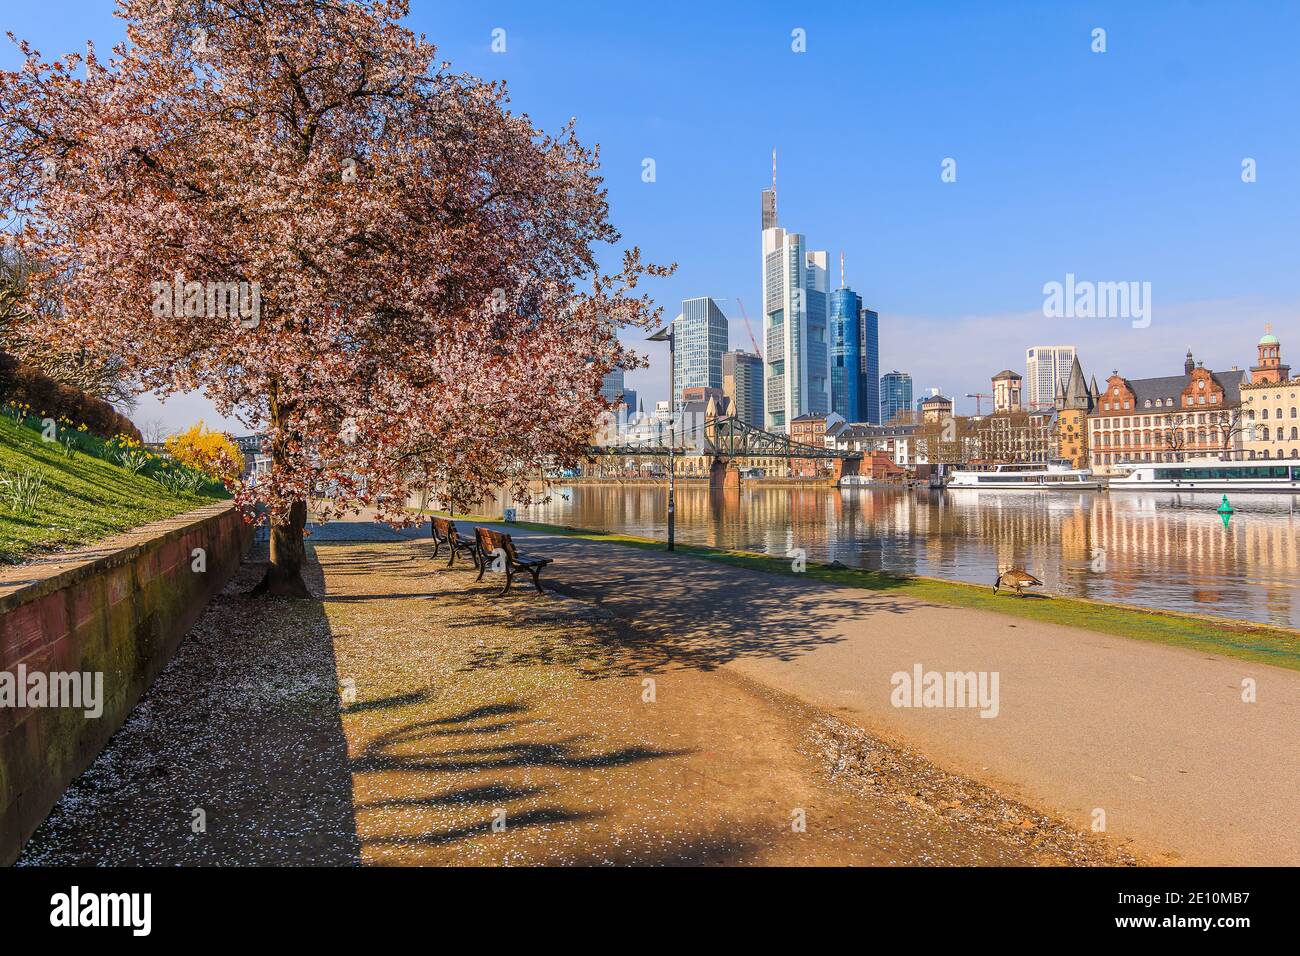 River Main in Frankfurt with parks on the banks. City skyline in sunshine. Tree with blossom and bench along the path in spring. Ships on the pier and Stock Photo